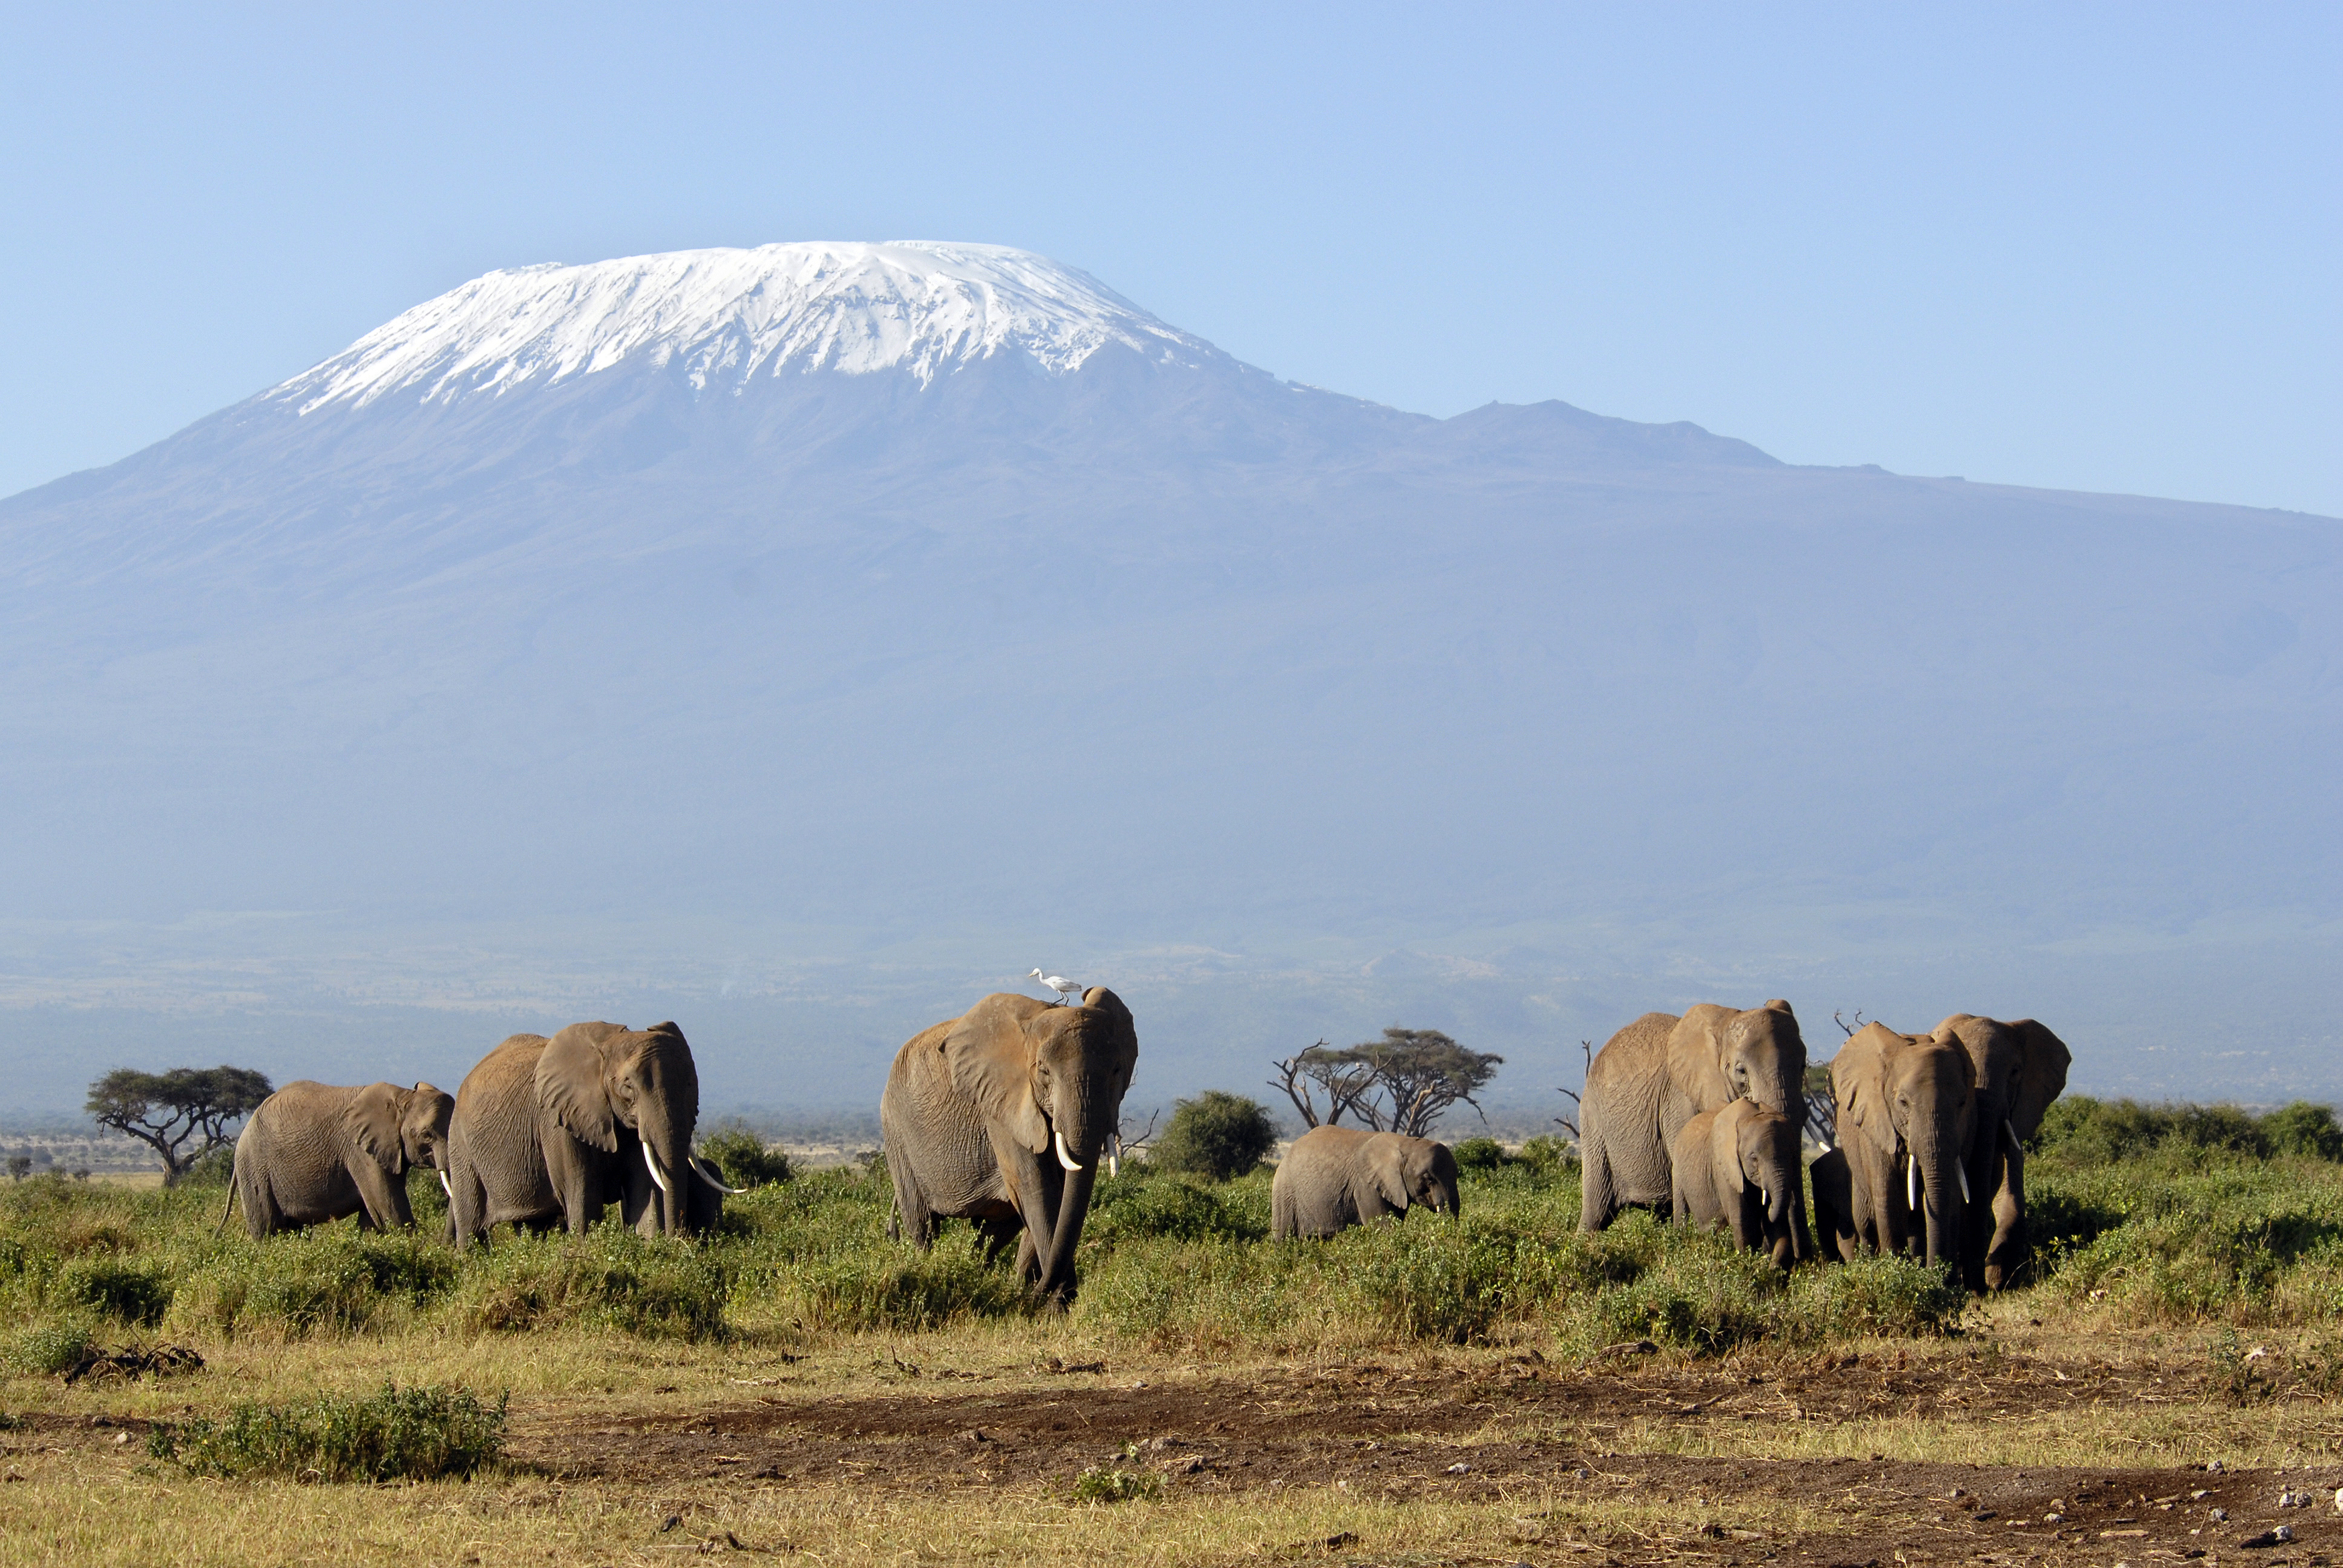 A herd of African Elephants with the backdrop of Mount Kilimanjaro - Kenya and Tanzanian border